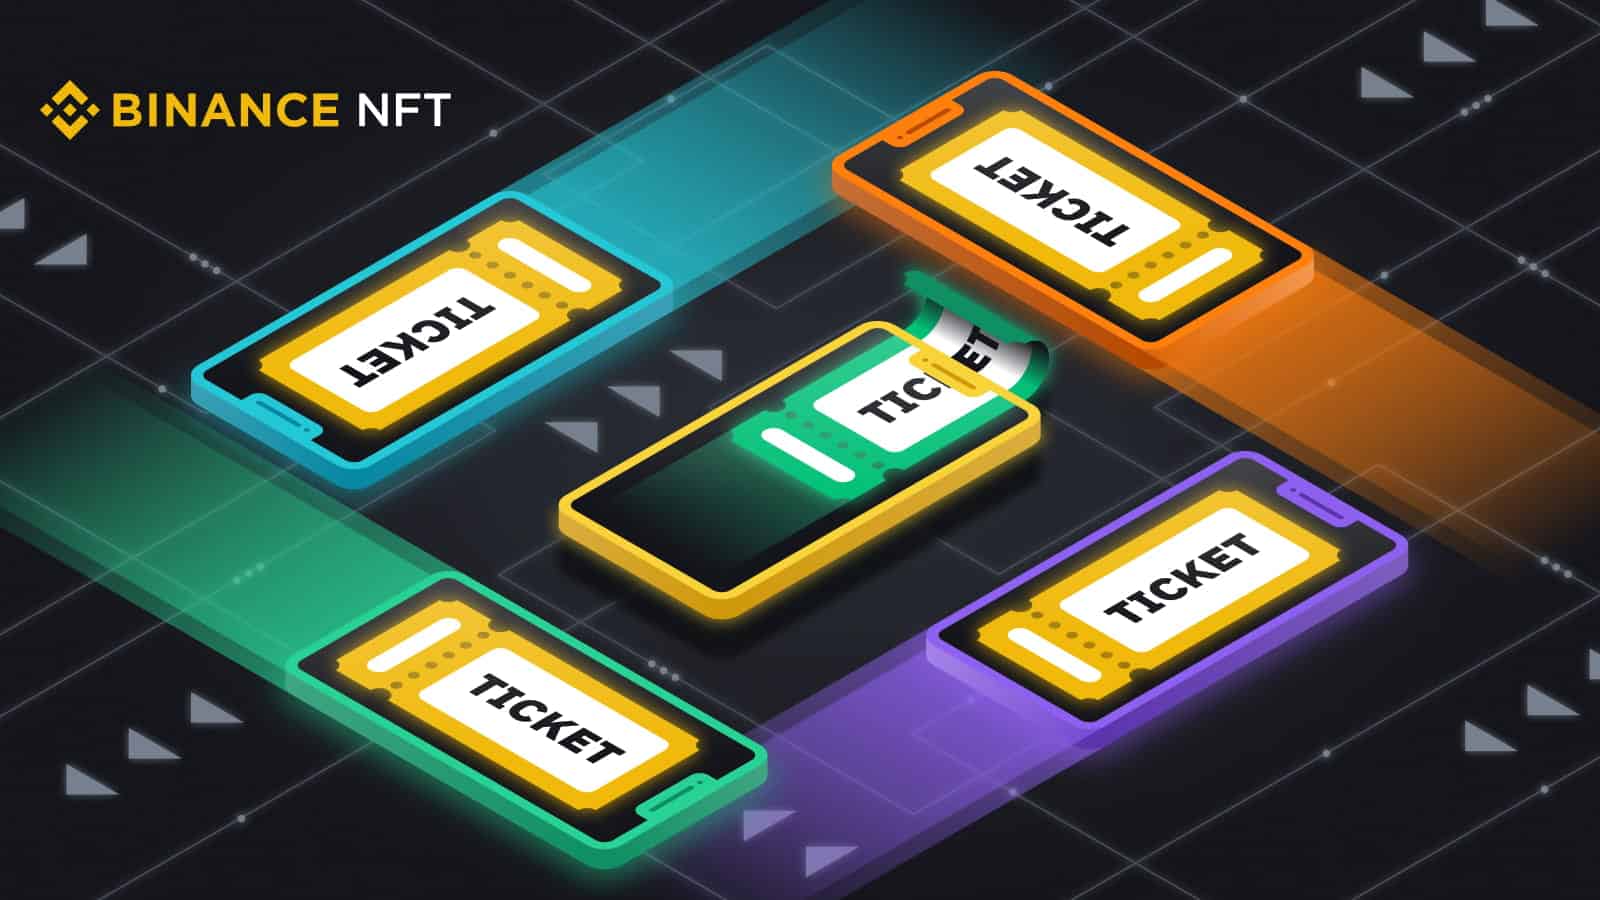 Binance NFT Ticket Bountyblok has replaced its centralized randomizer service, and integrated Chainlink VRF and Price Feeds on the Polygon Mainnet for their distribution tools and giveaways. 